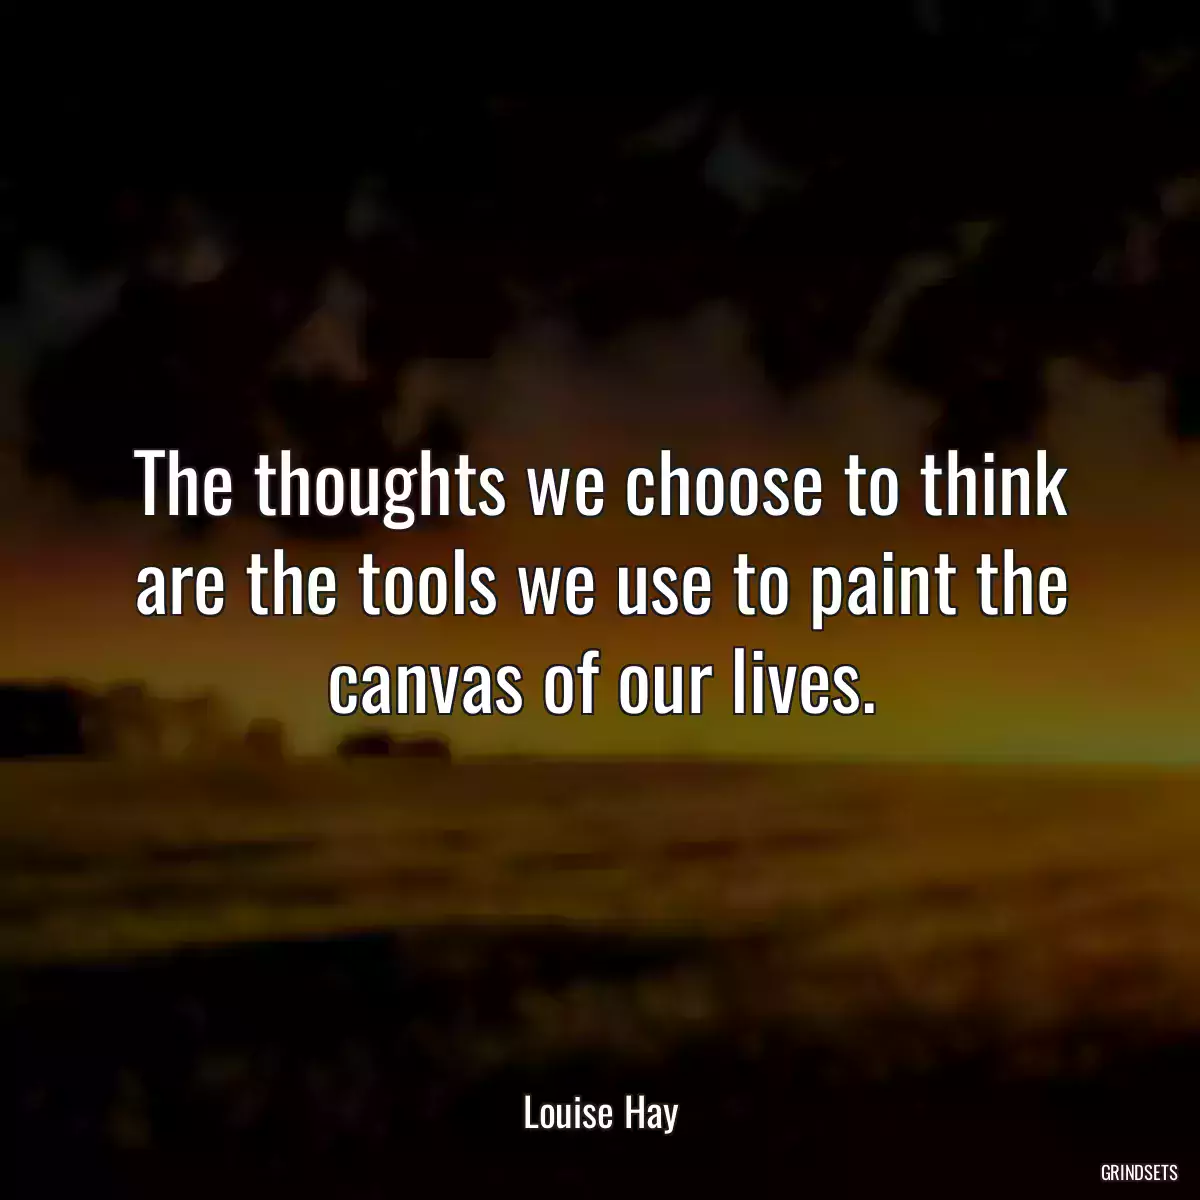 The thoughts we choose to think are the tools we use to paint the canvas of our lives.